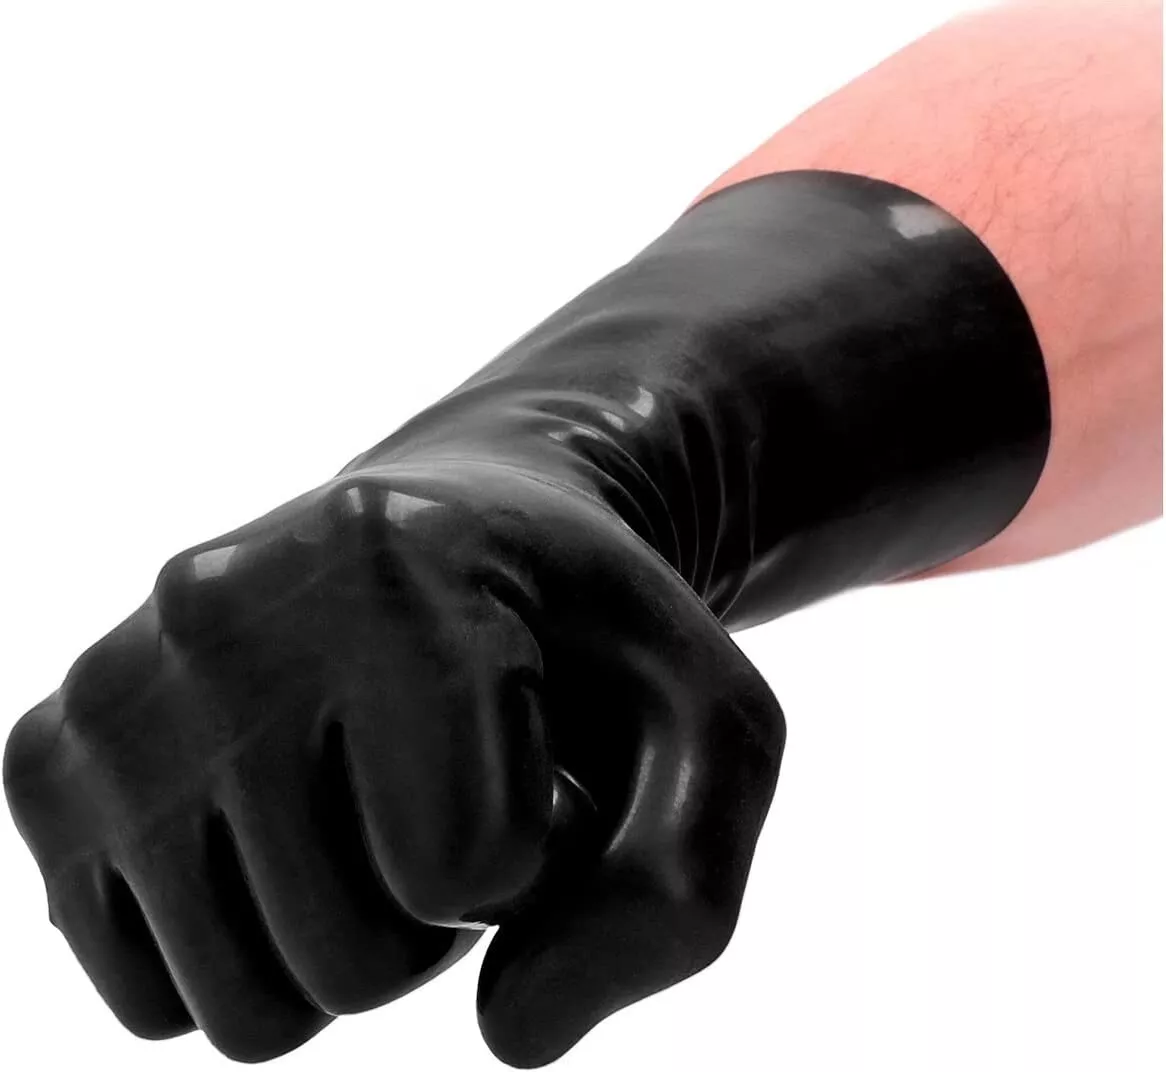 Best of Latex gloves anal fisting